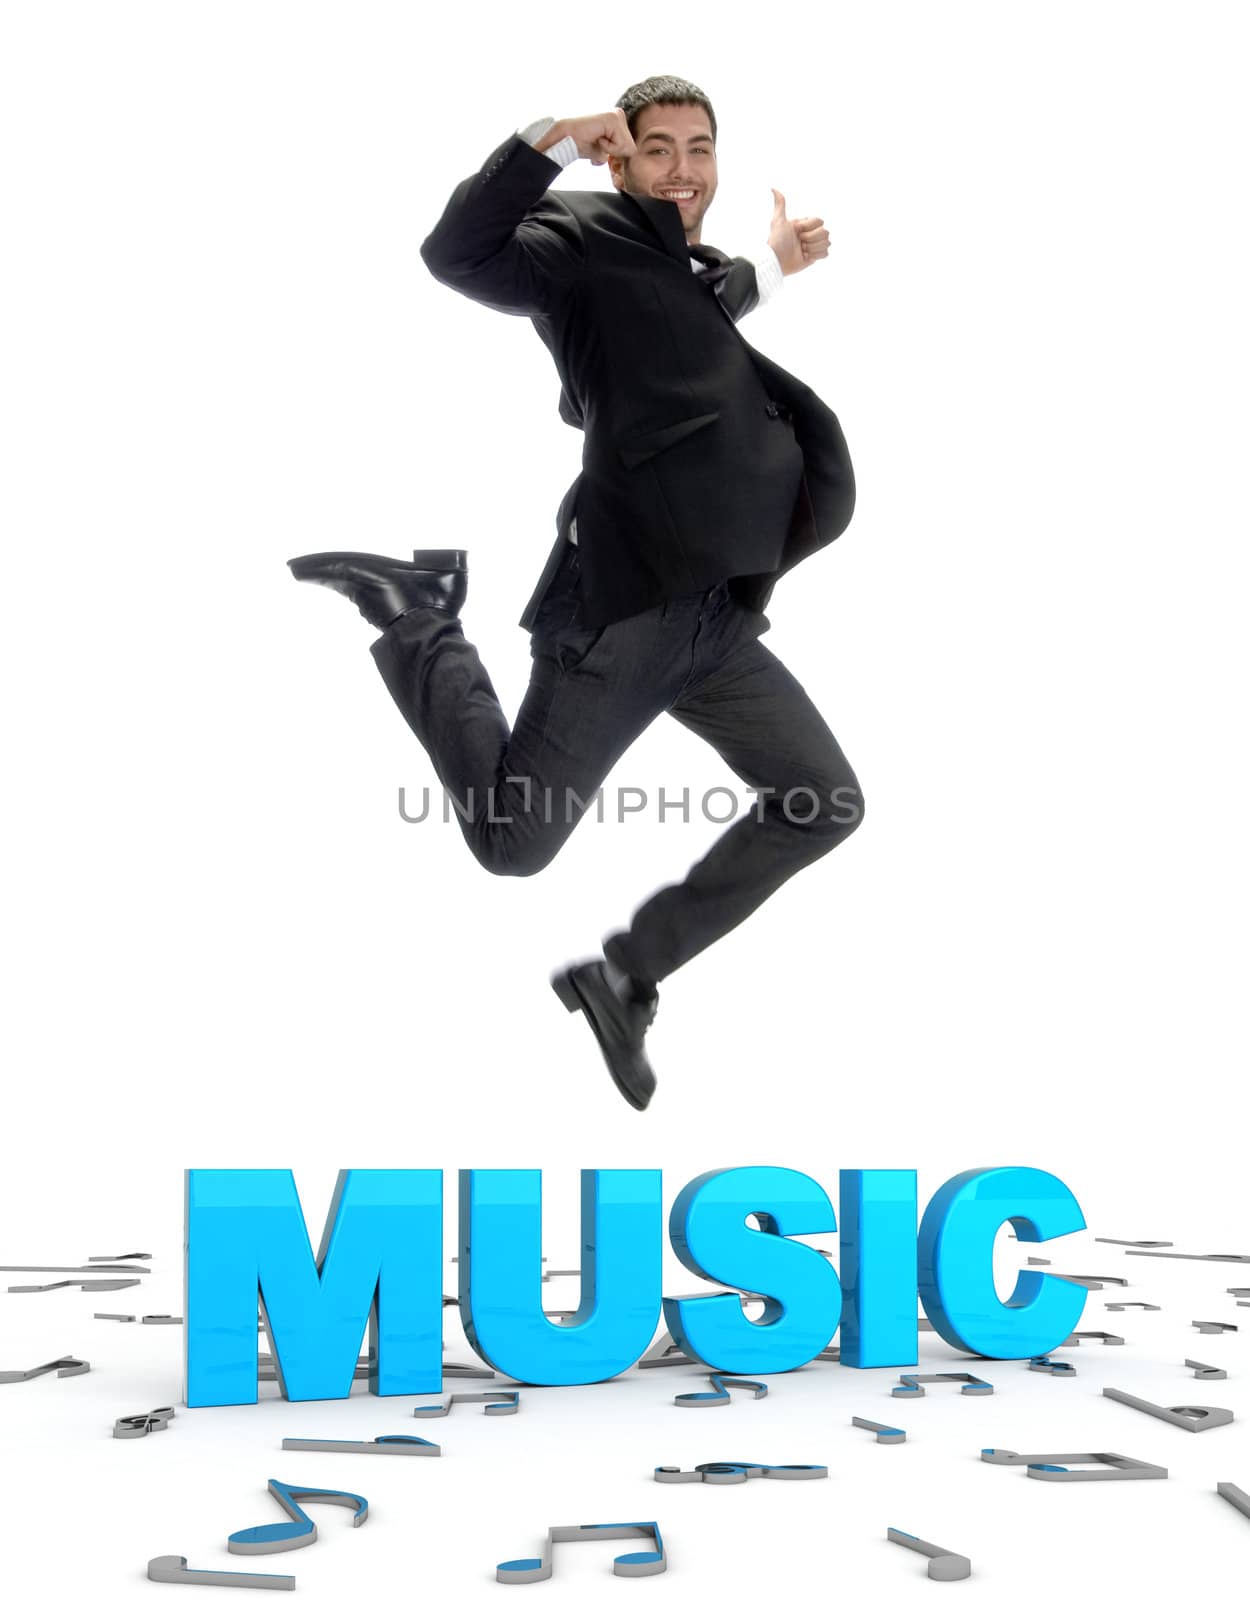 young guy jumping and showing thumbs up with musical text 